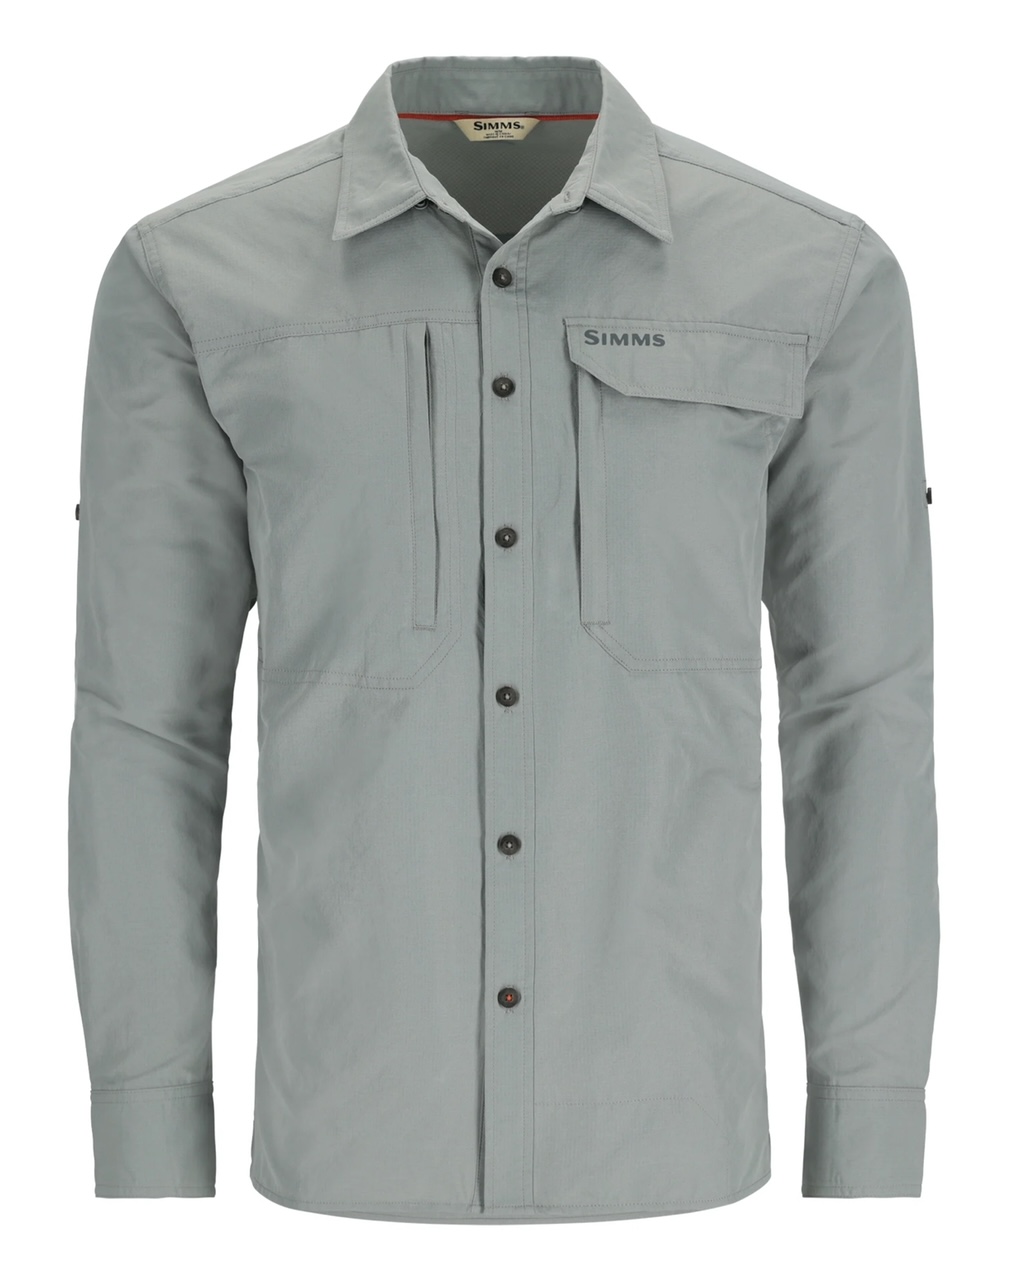 Simms M's Guide Shirt - Cinder - Large